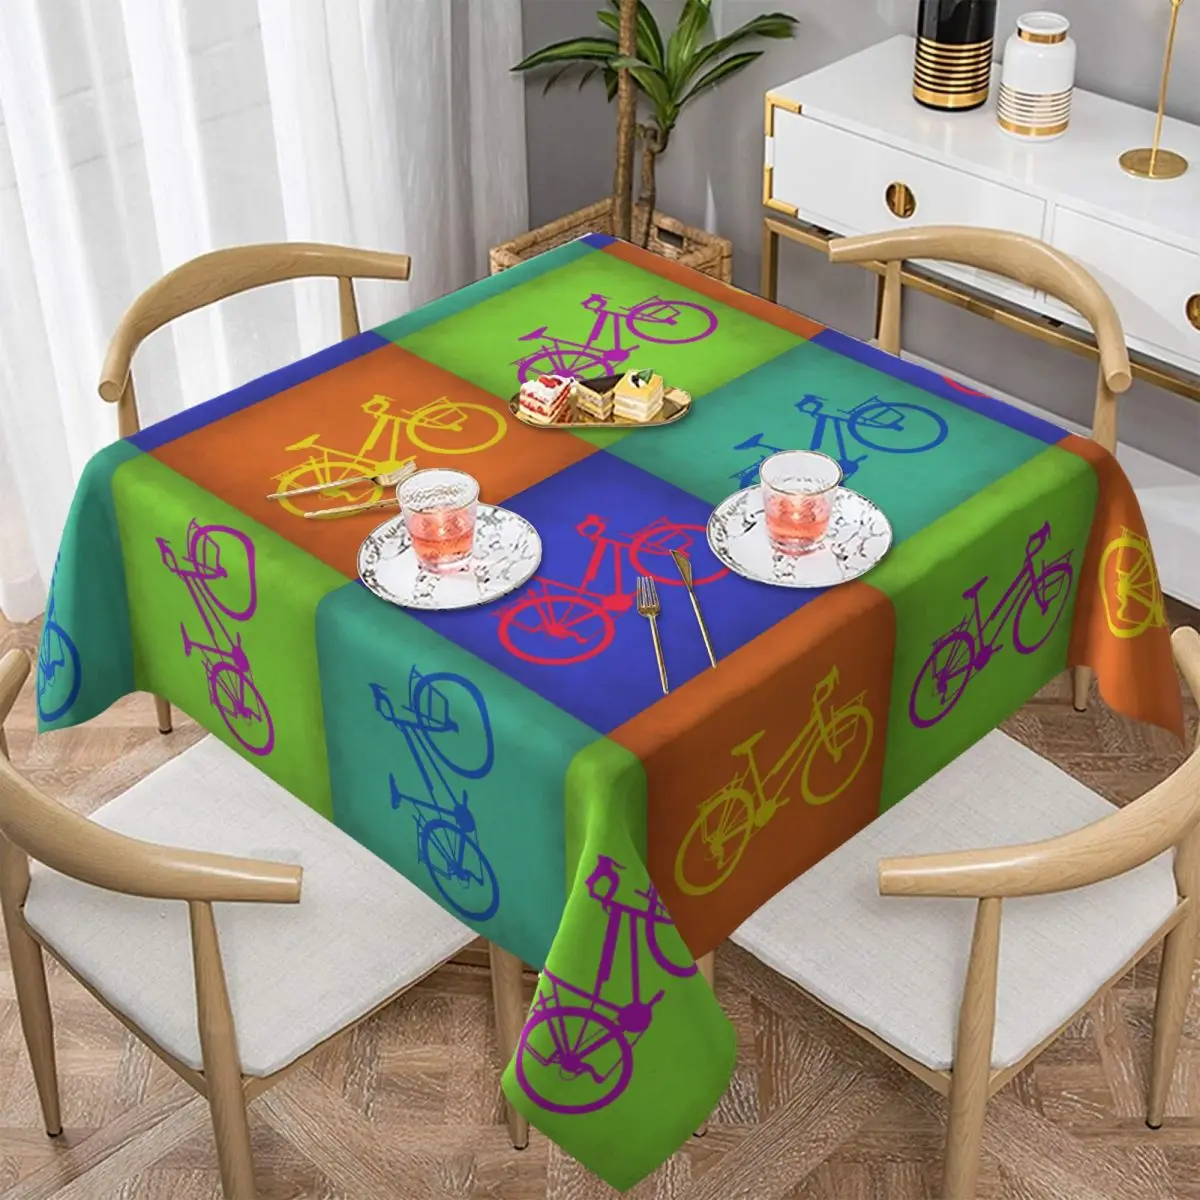 

Colorful Vintage Bicycle Tablecloth Water Resistant Table Cloth Decorative Table Cover for Dining Table Buffet Parties Camping